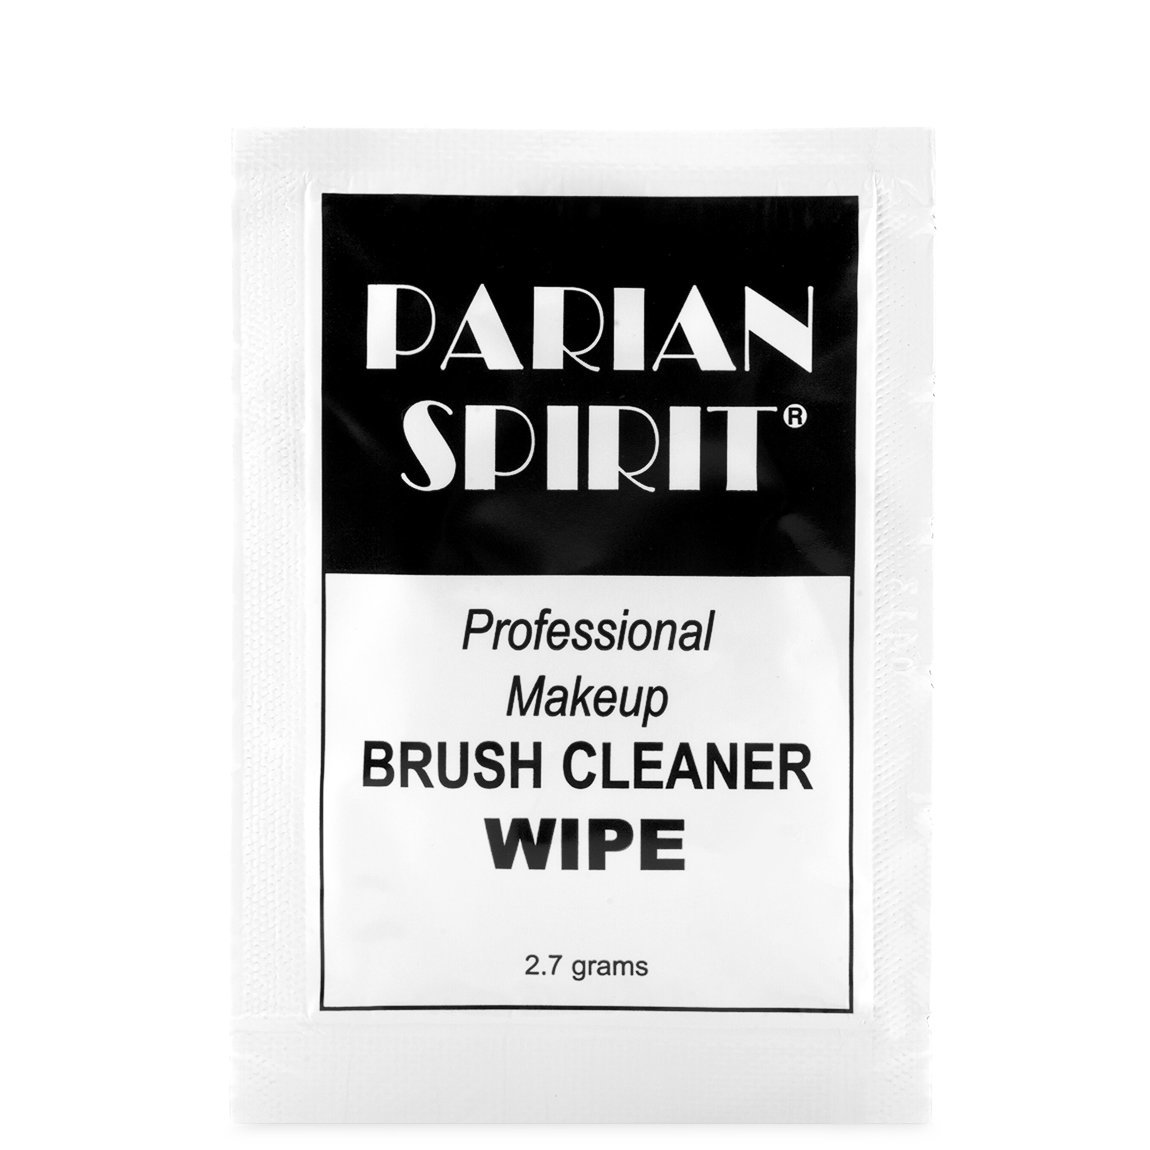 Parian Spirit 24 Pack of Professional Makeup Brush Cleaner Wipes alternative view 1.